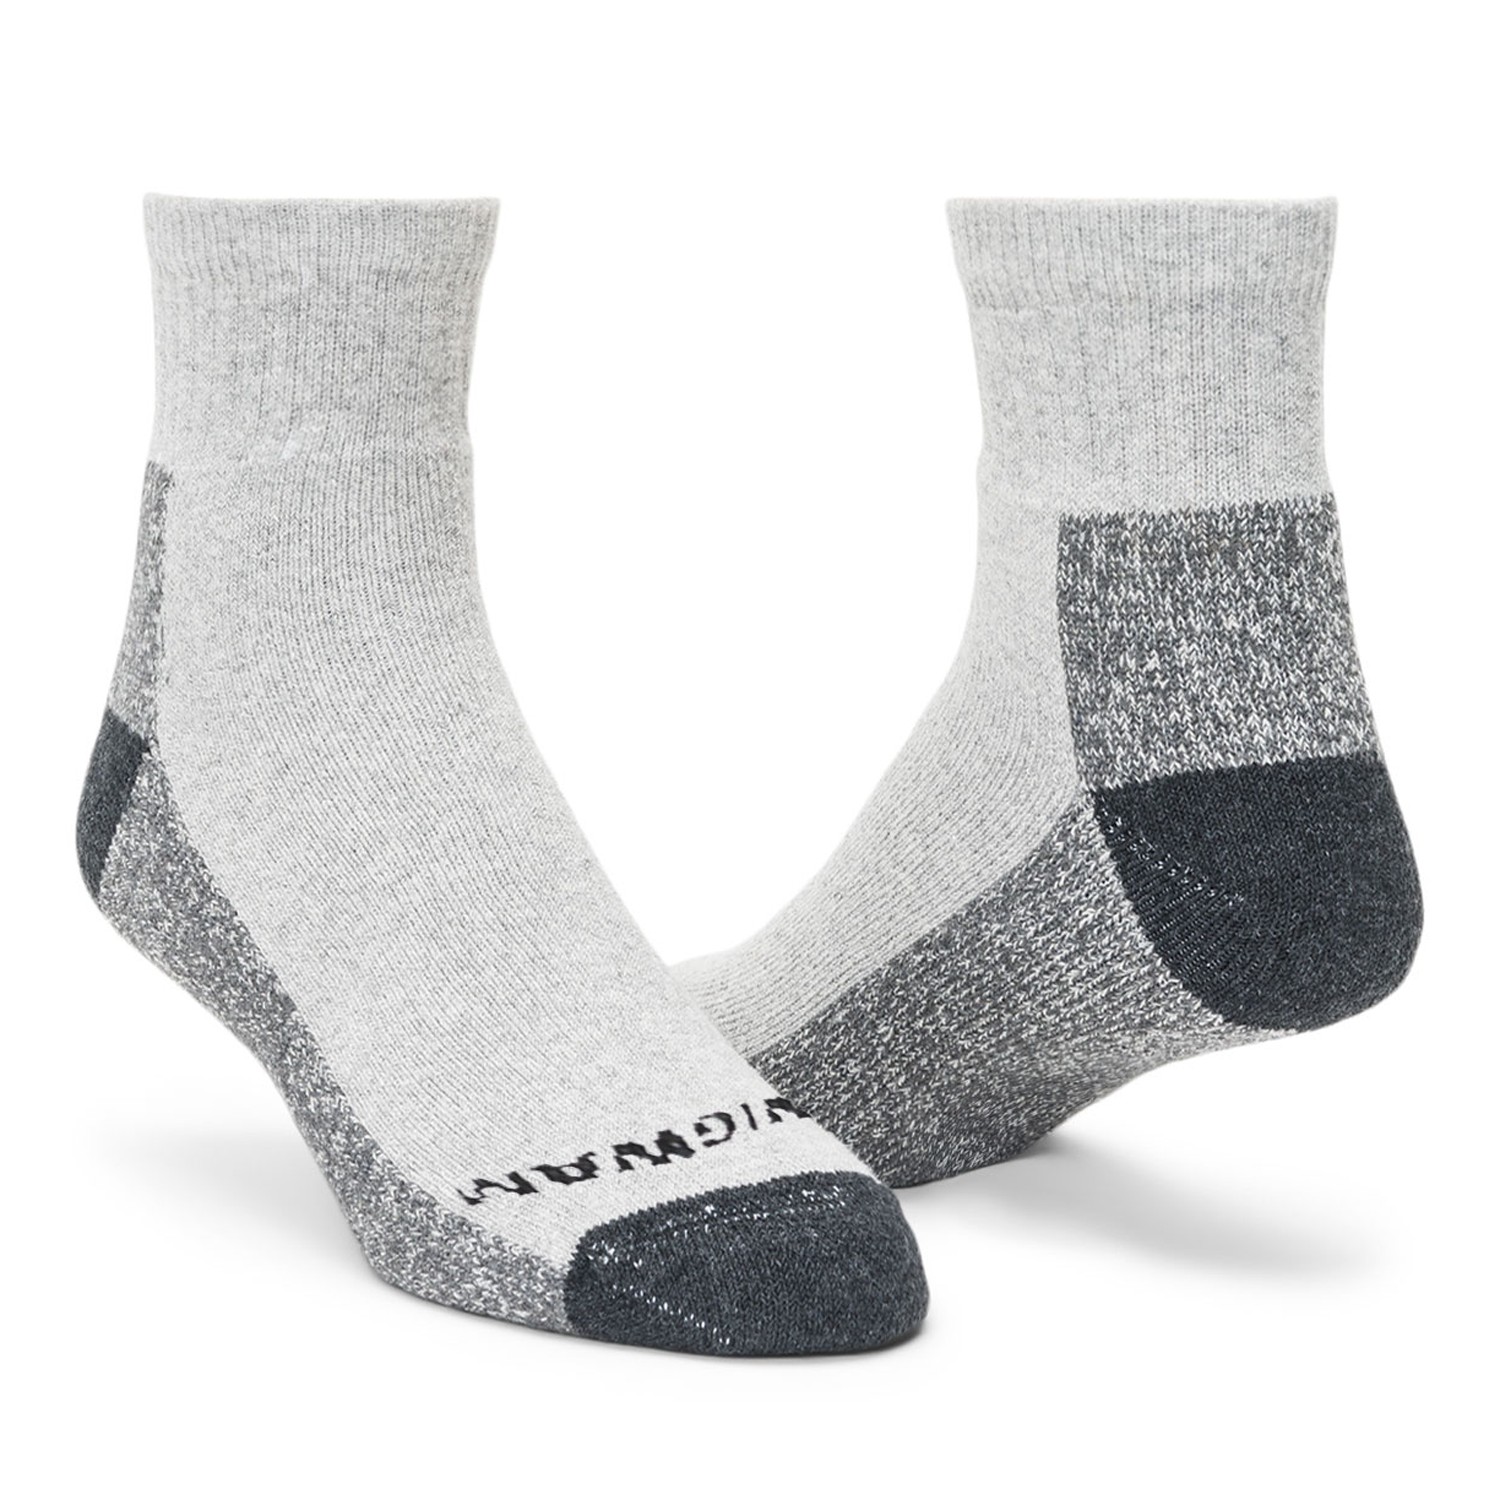 At Work Quarter 3-Pack Cotton Socks - Grey full product perspective - made in The USA Wigwam Socks